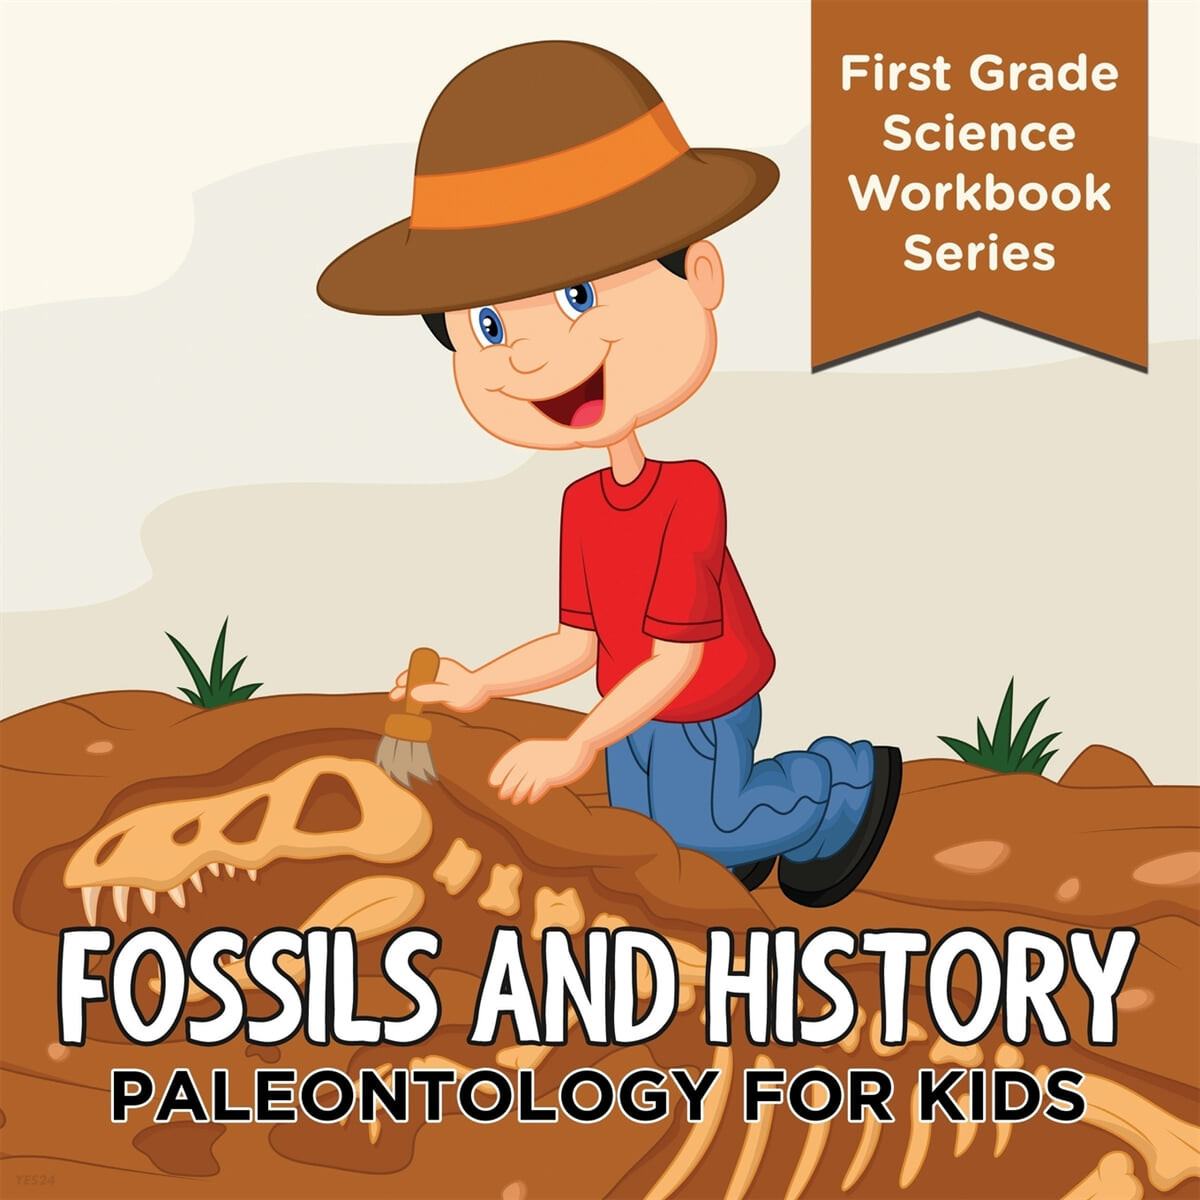 Fossils And History (Paleontology for Kids (First Grade Science Workbook Series))